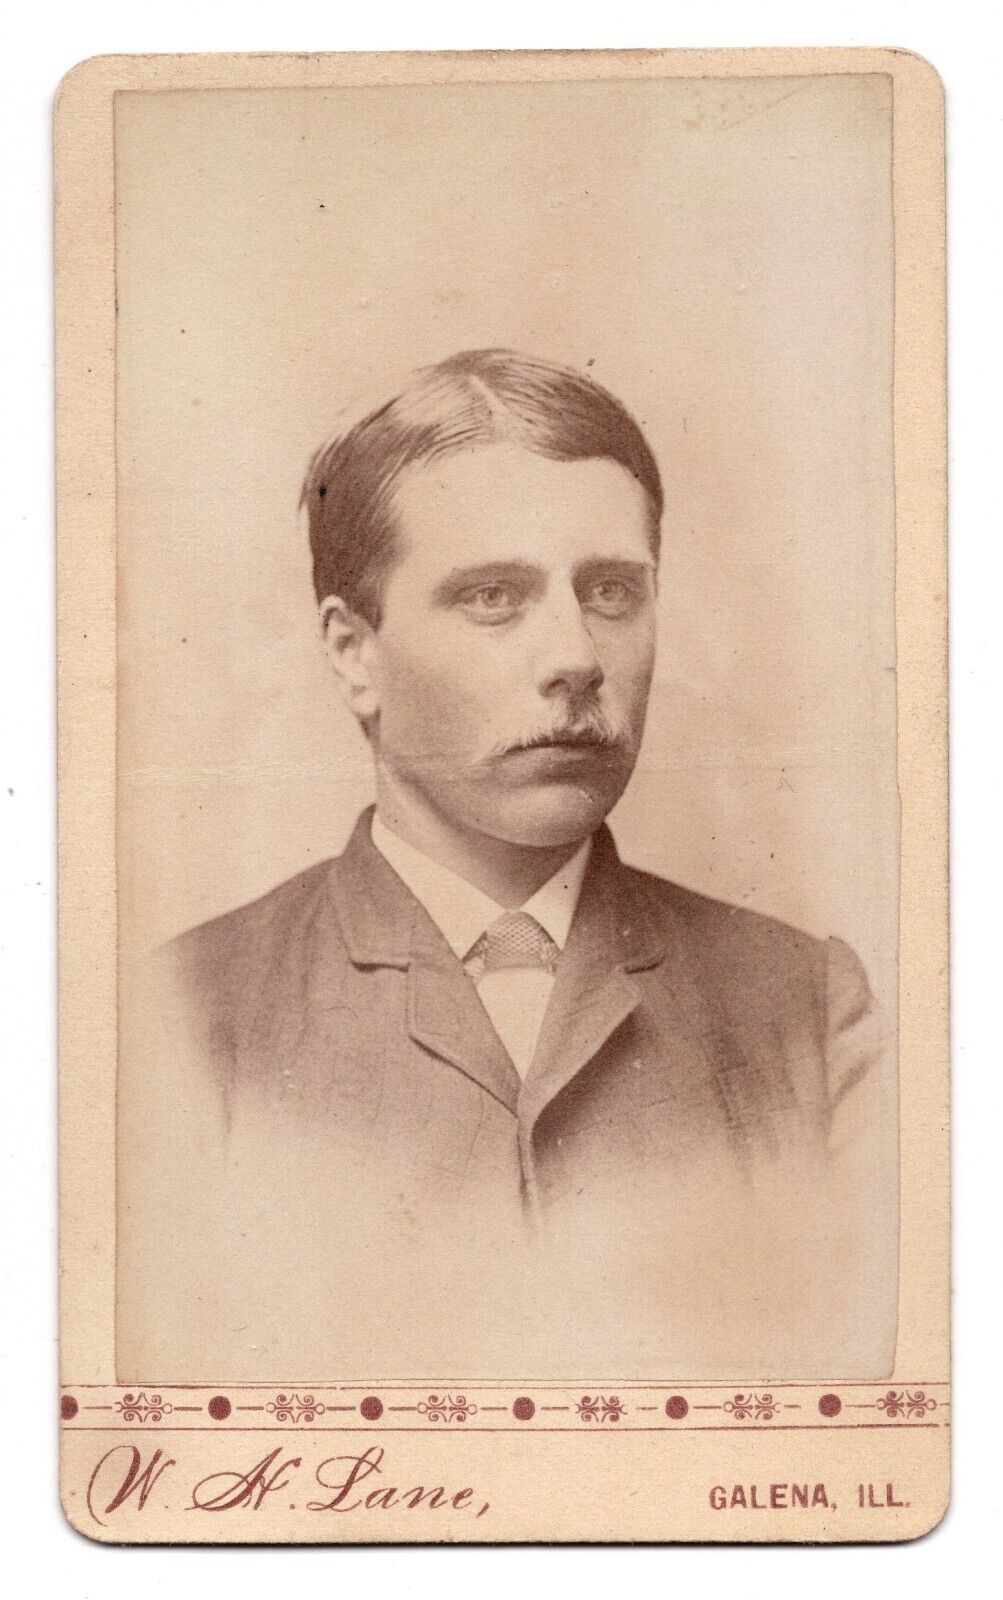 C. 1880s CDV W.H. LANE HANDSOME YOUNG MAN IN SUIT WITH MUSTACHE GALENA ILLINOIS